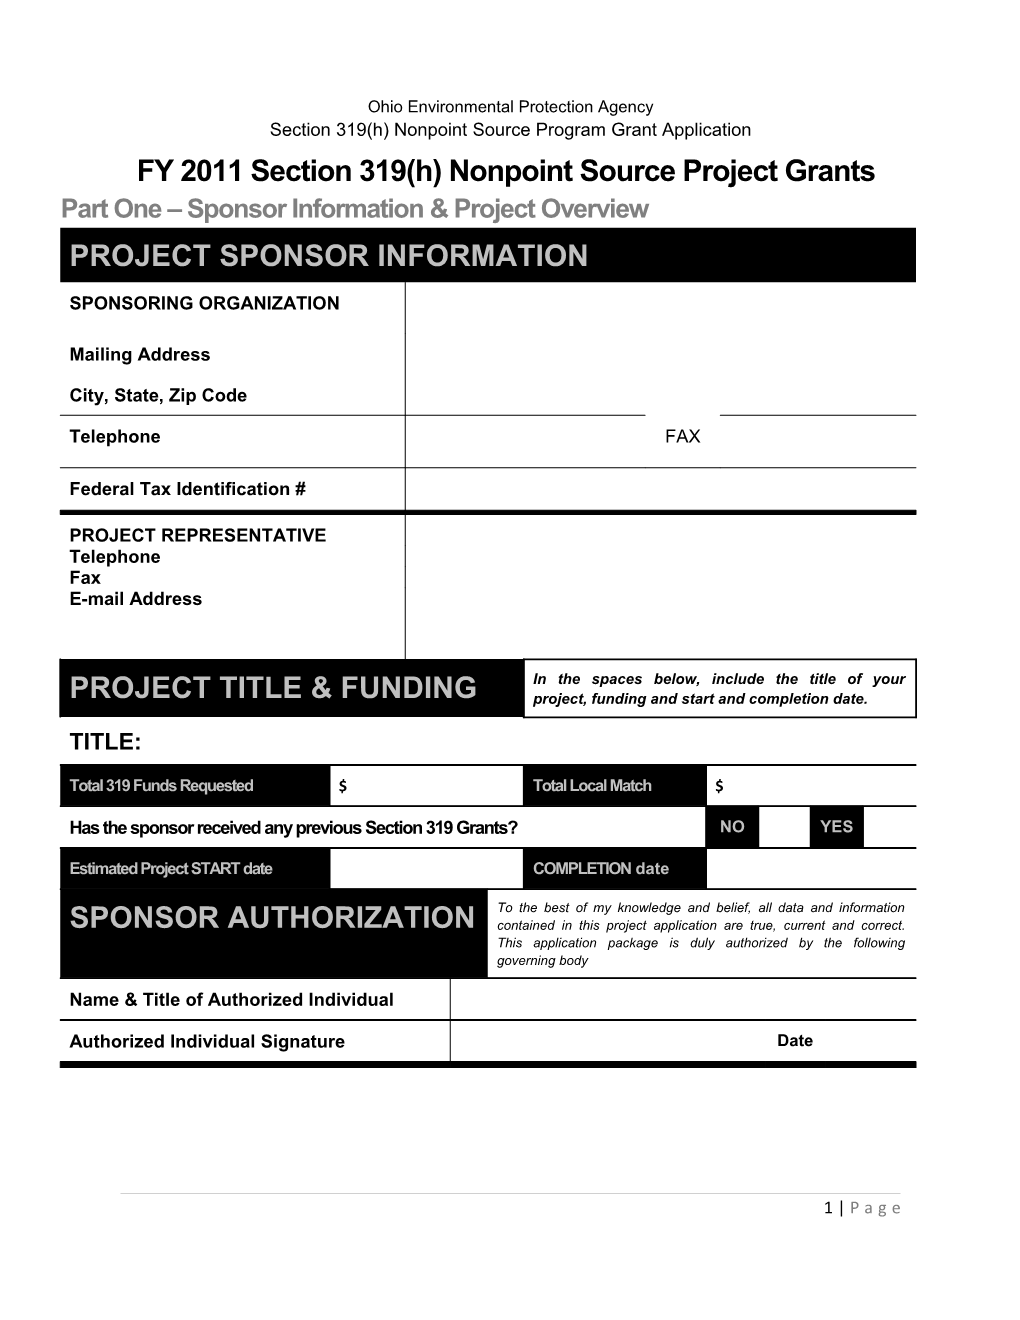 FY 2011 Section 319(H) Nonpoint Source Project Grants